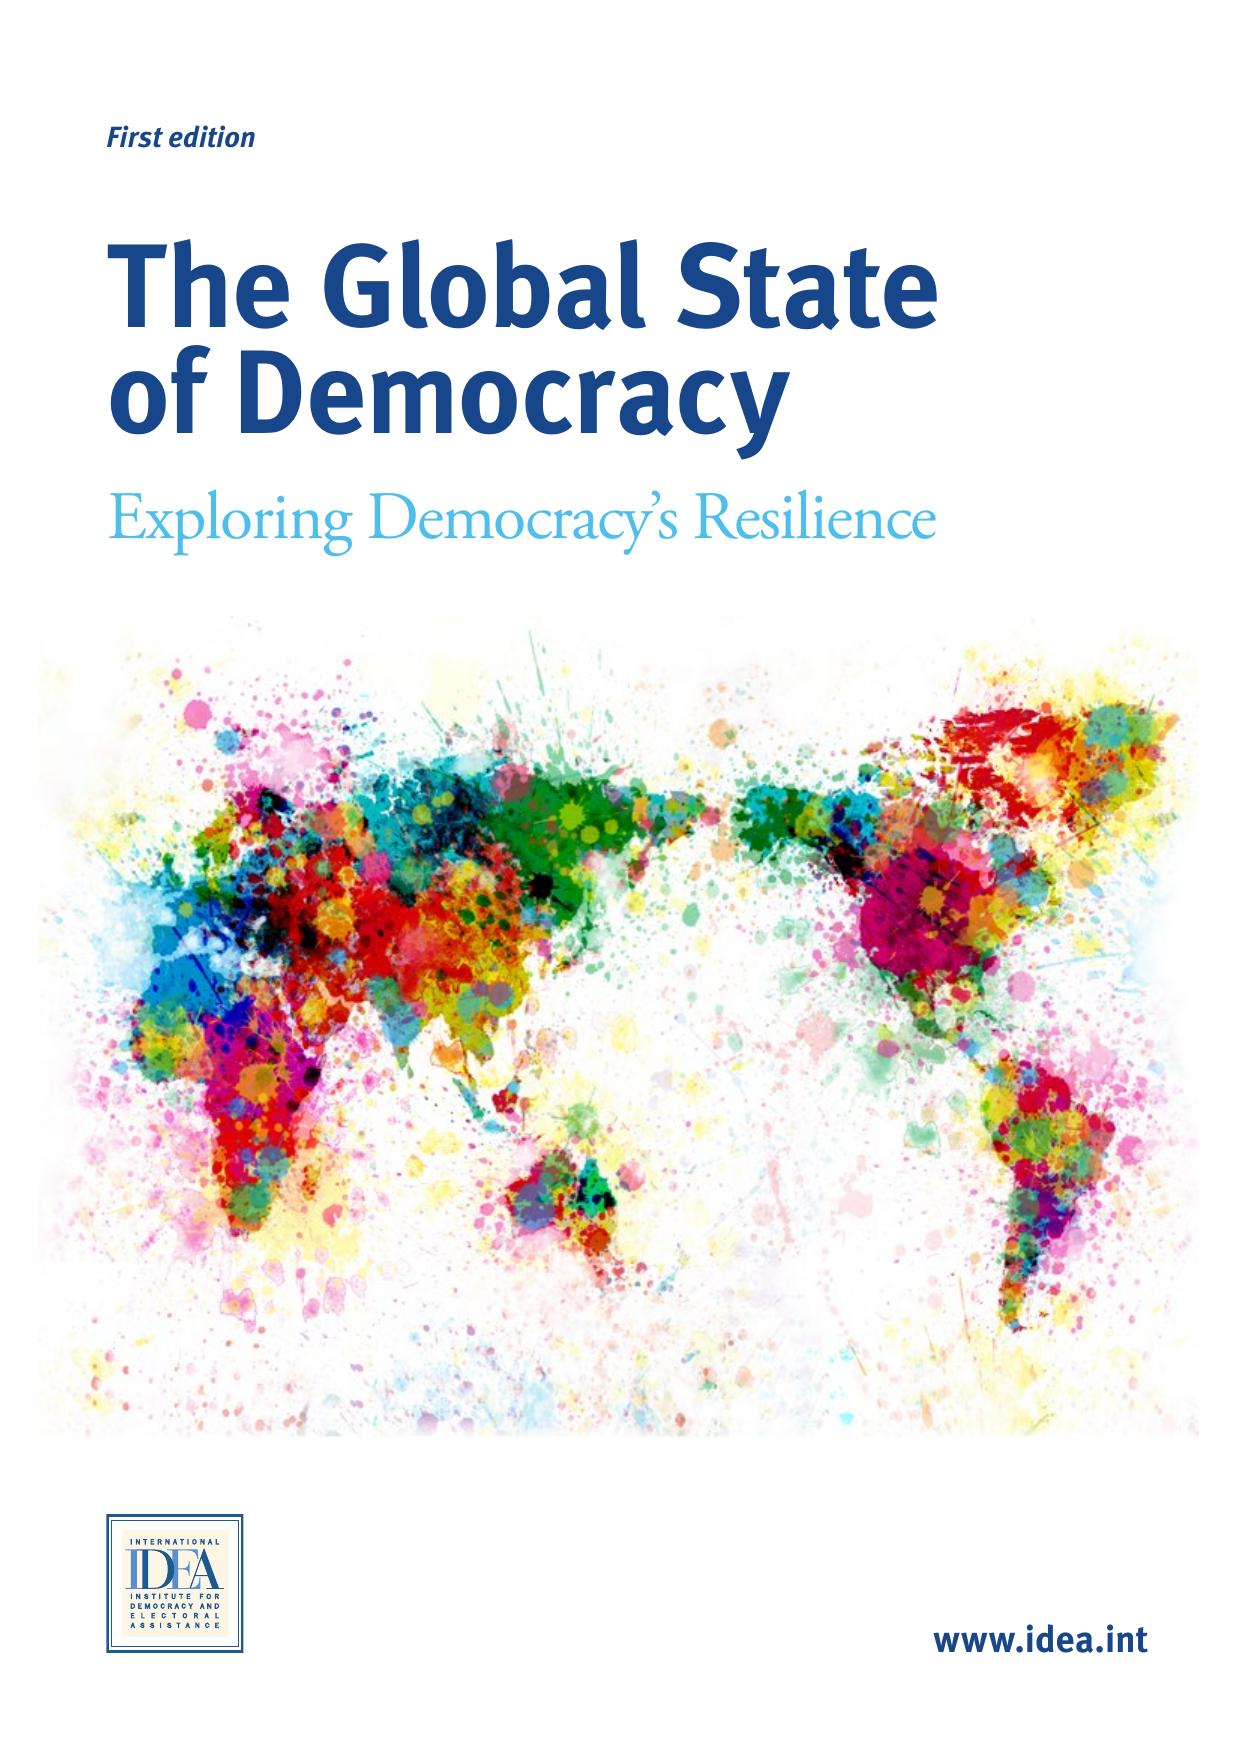 The Global State of Democracy: Exploring Democracy's Resilience